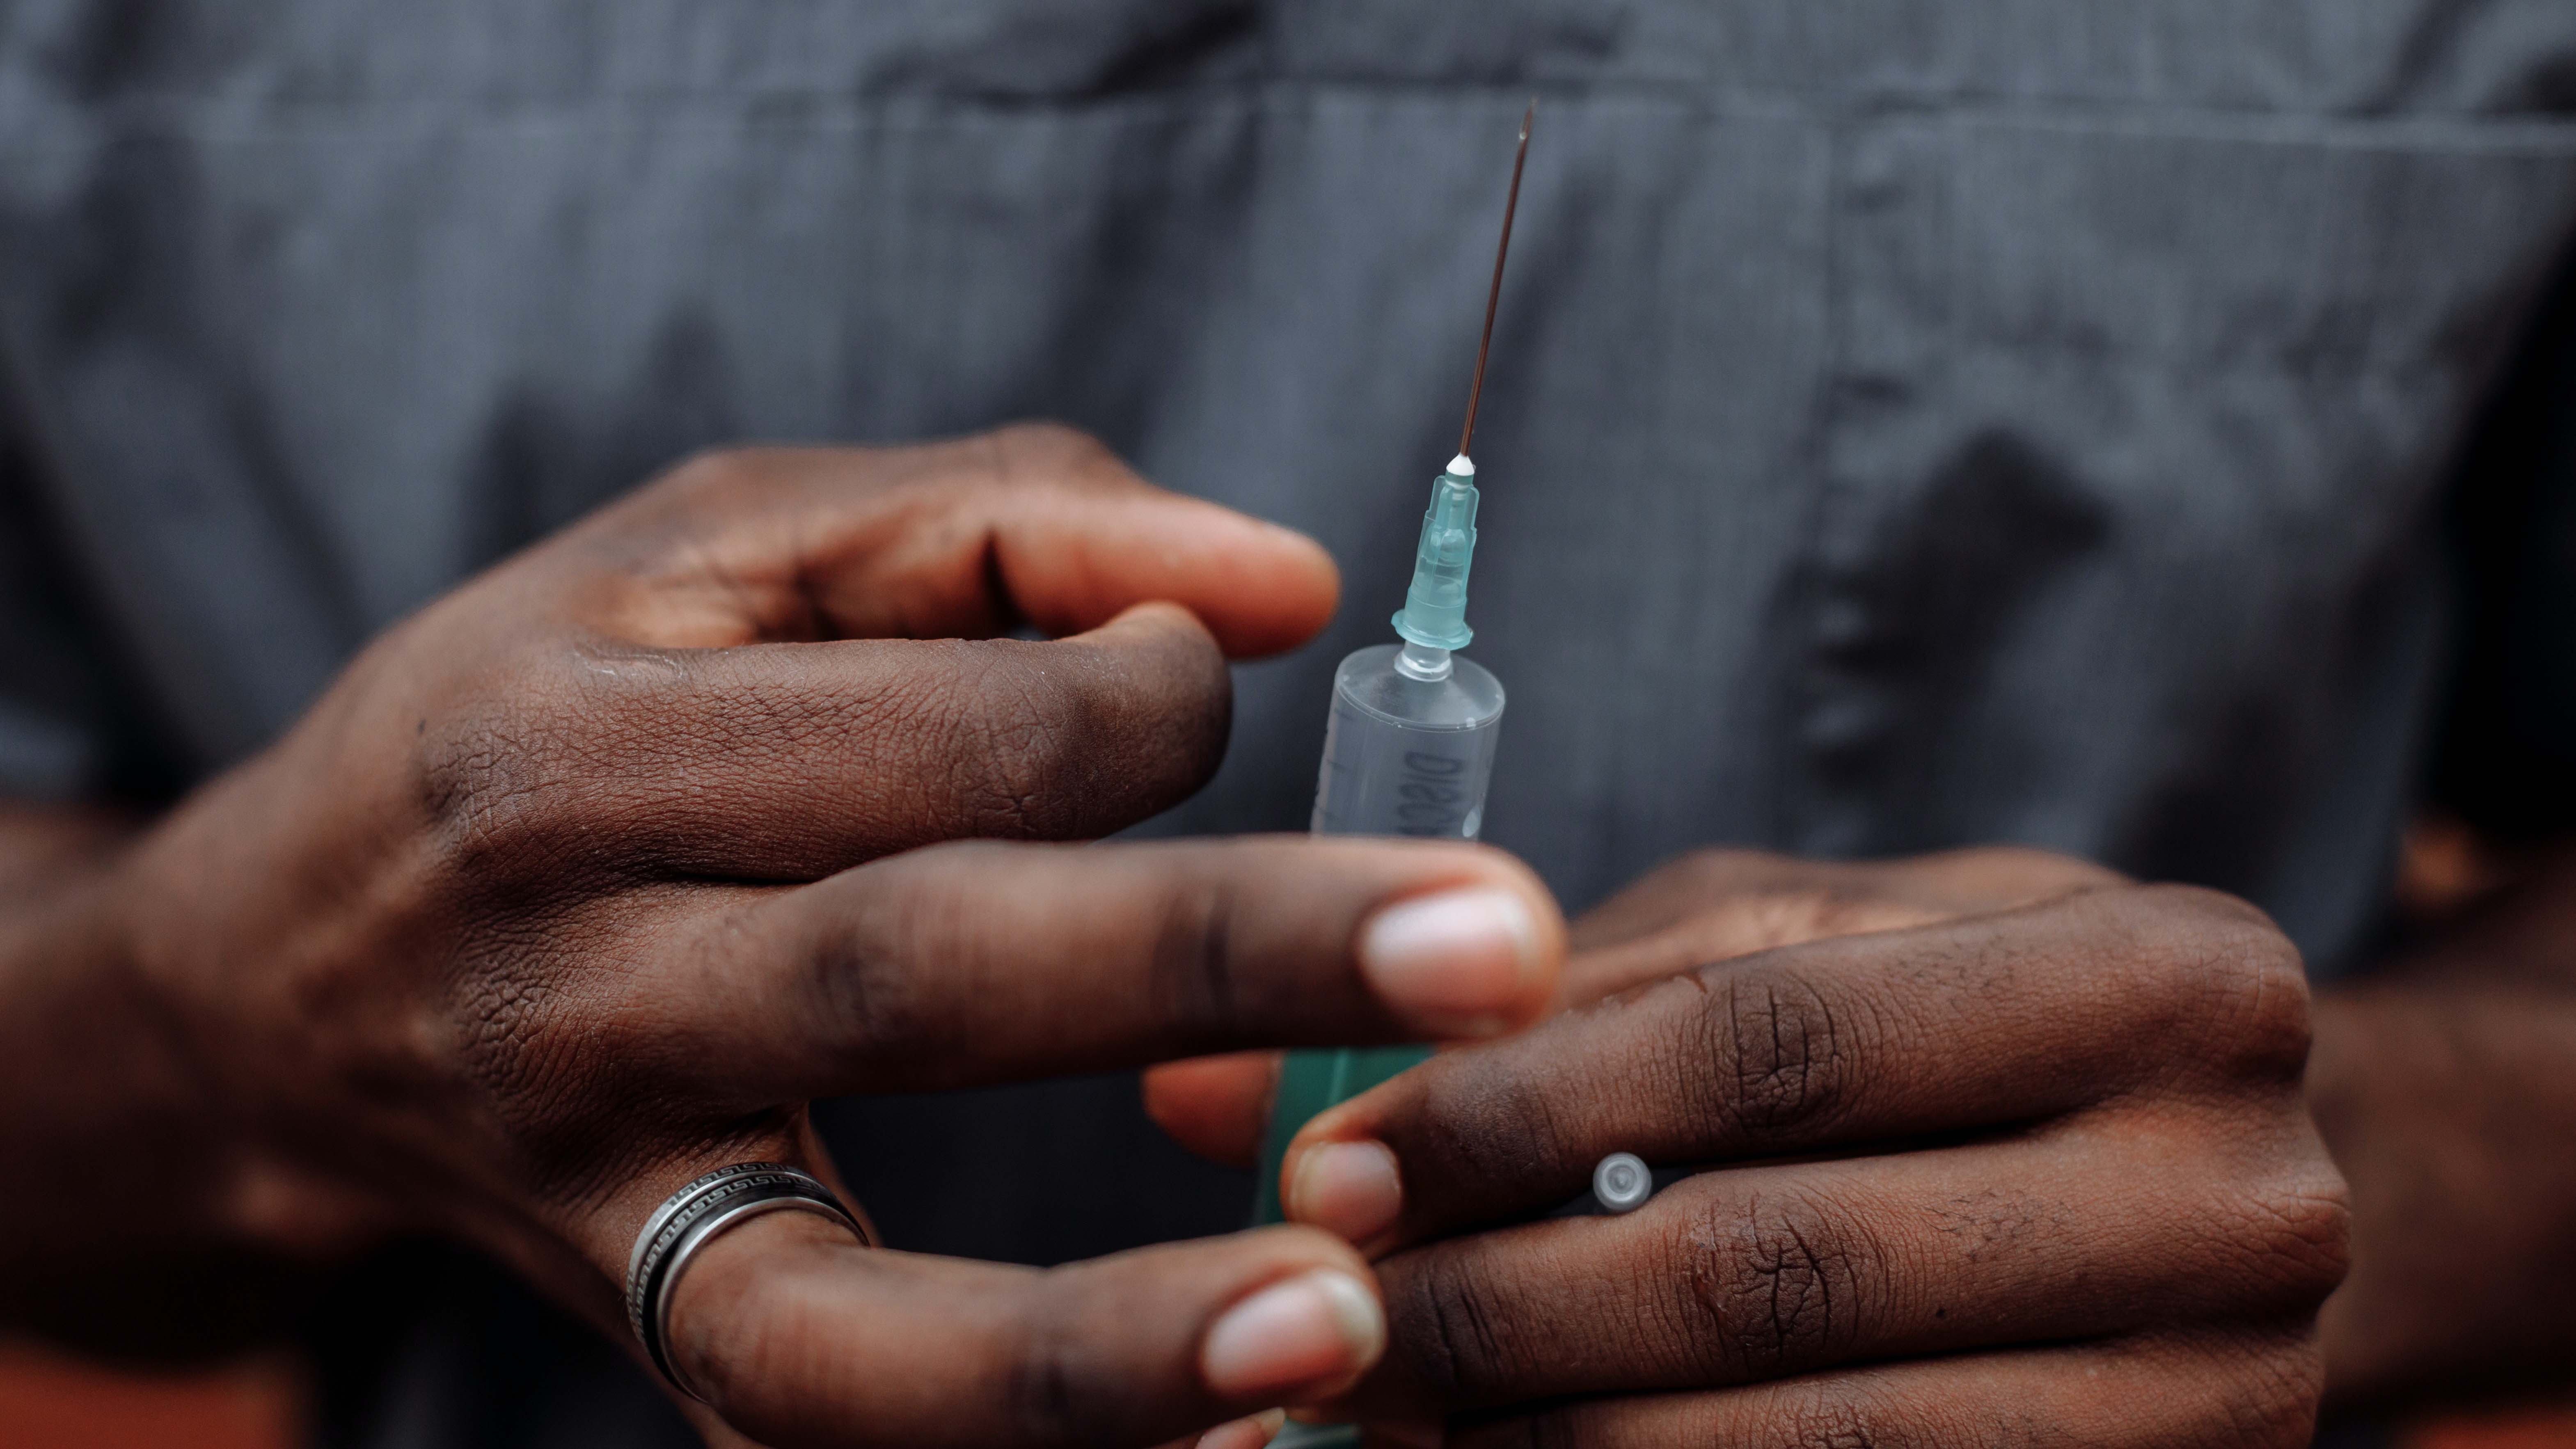 African American man flicking a needle